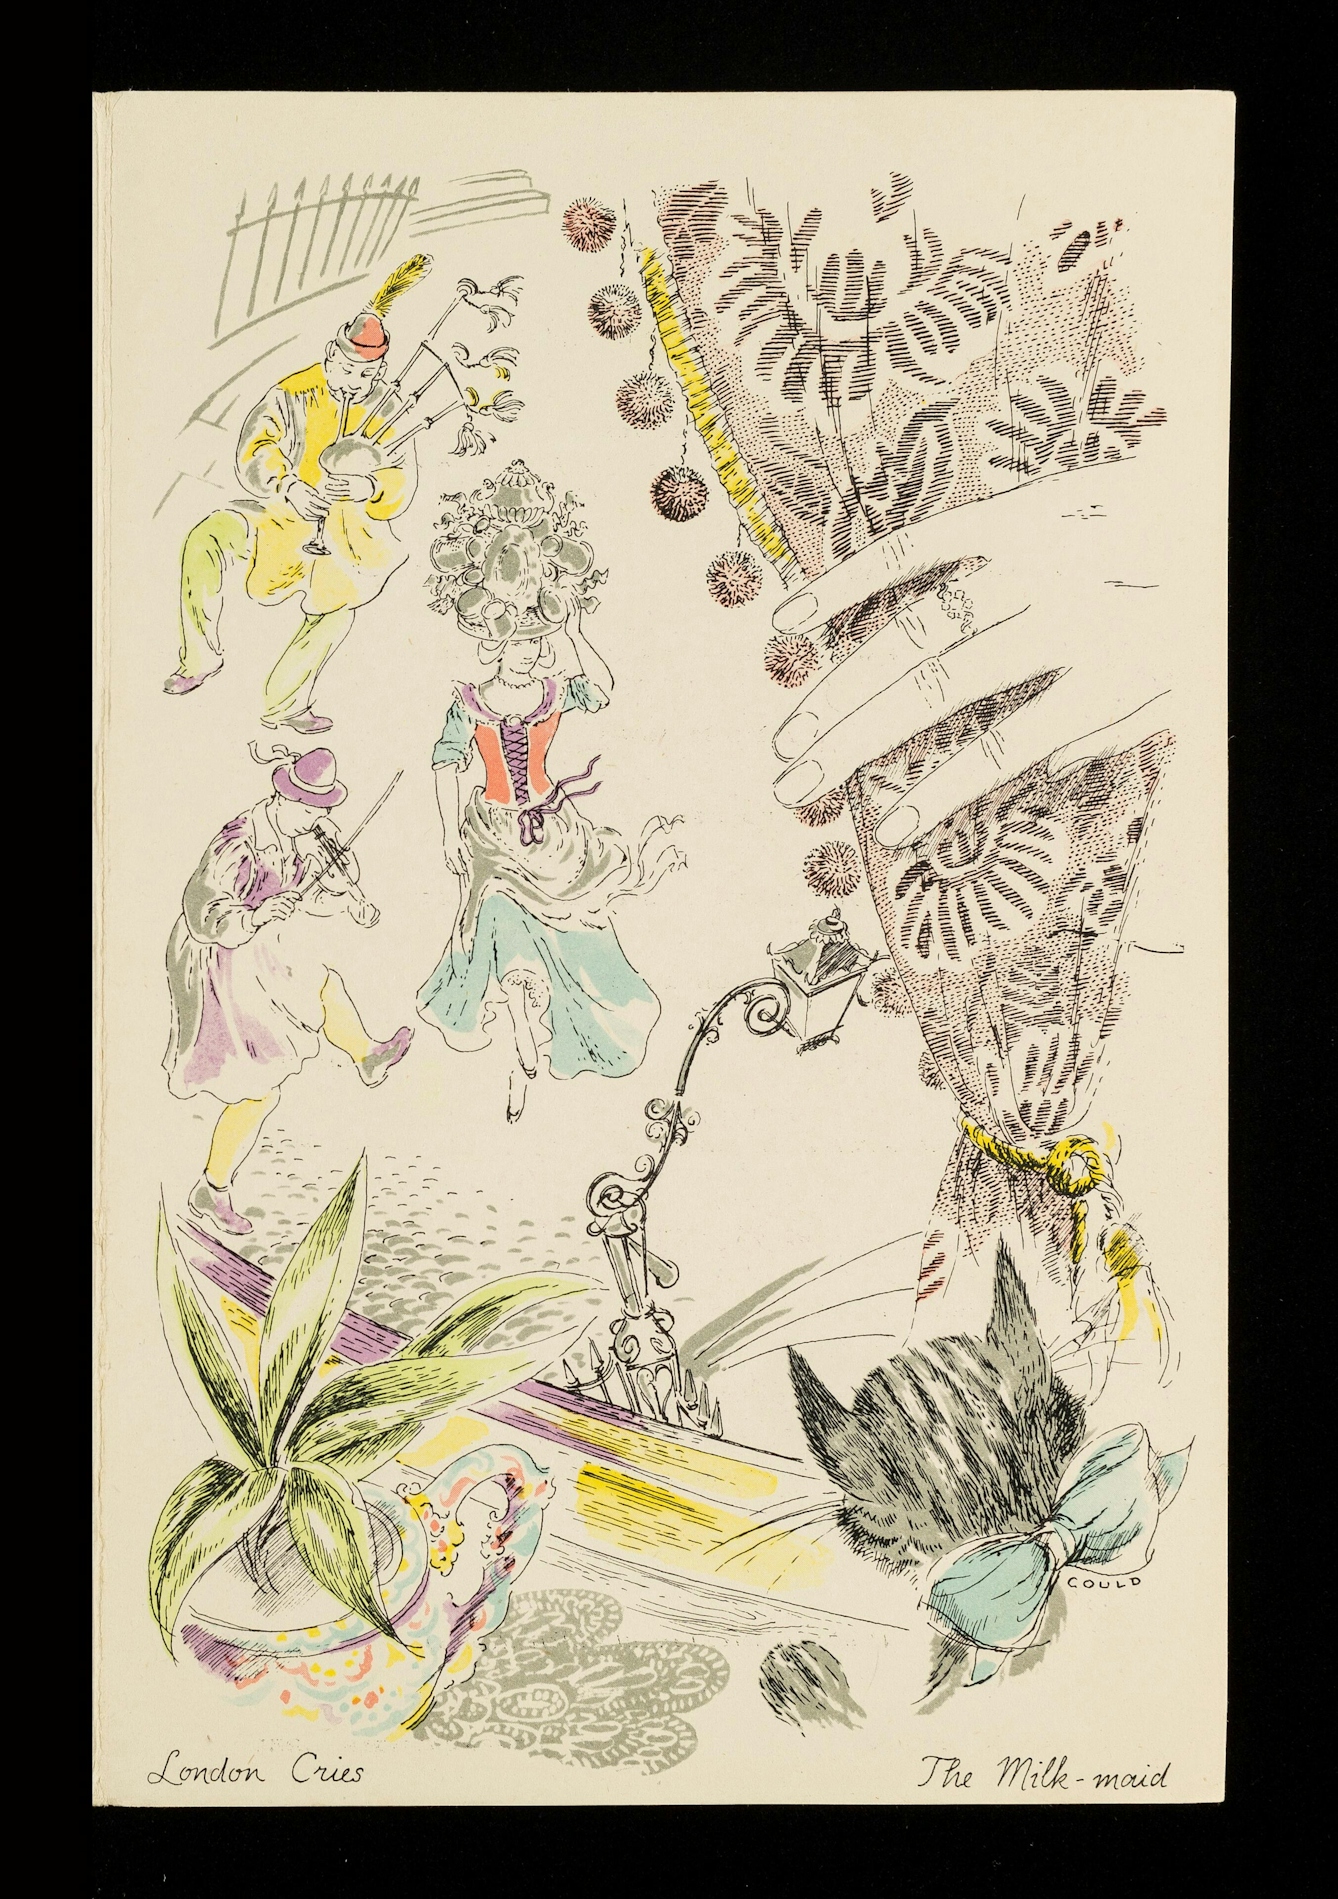 Coloured drawing showing a hand pulling back a curtain, kitten and aspidestra on the sill, with a view from the window looking down at a woman wearing what looks like a hat made from silver flagons, plates and teapot and two men dancing below with violin and bagpipes.